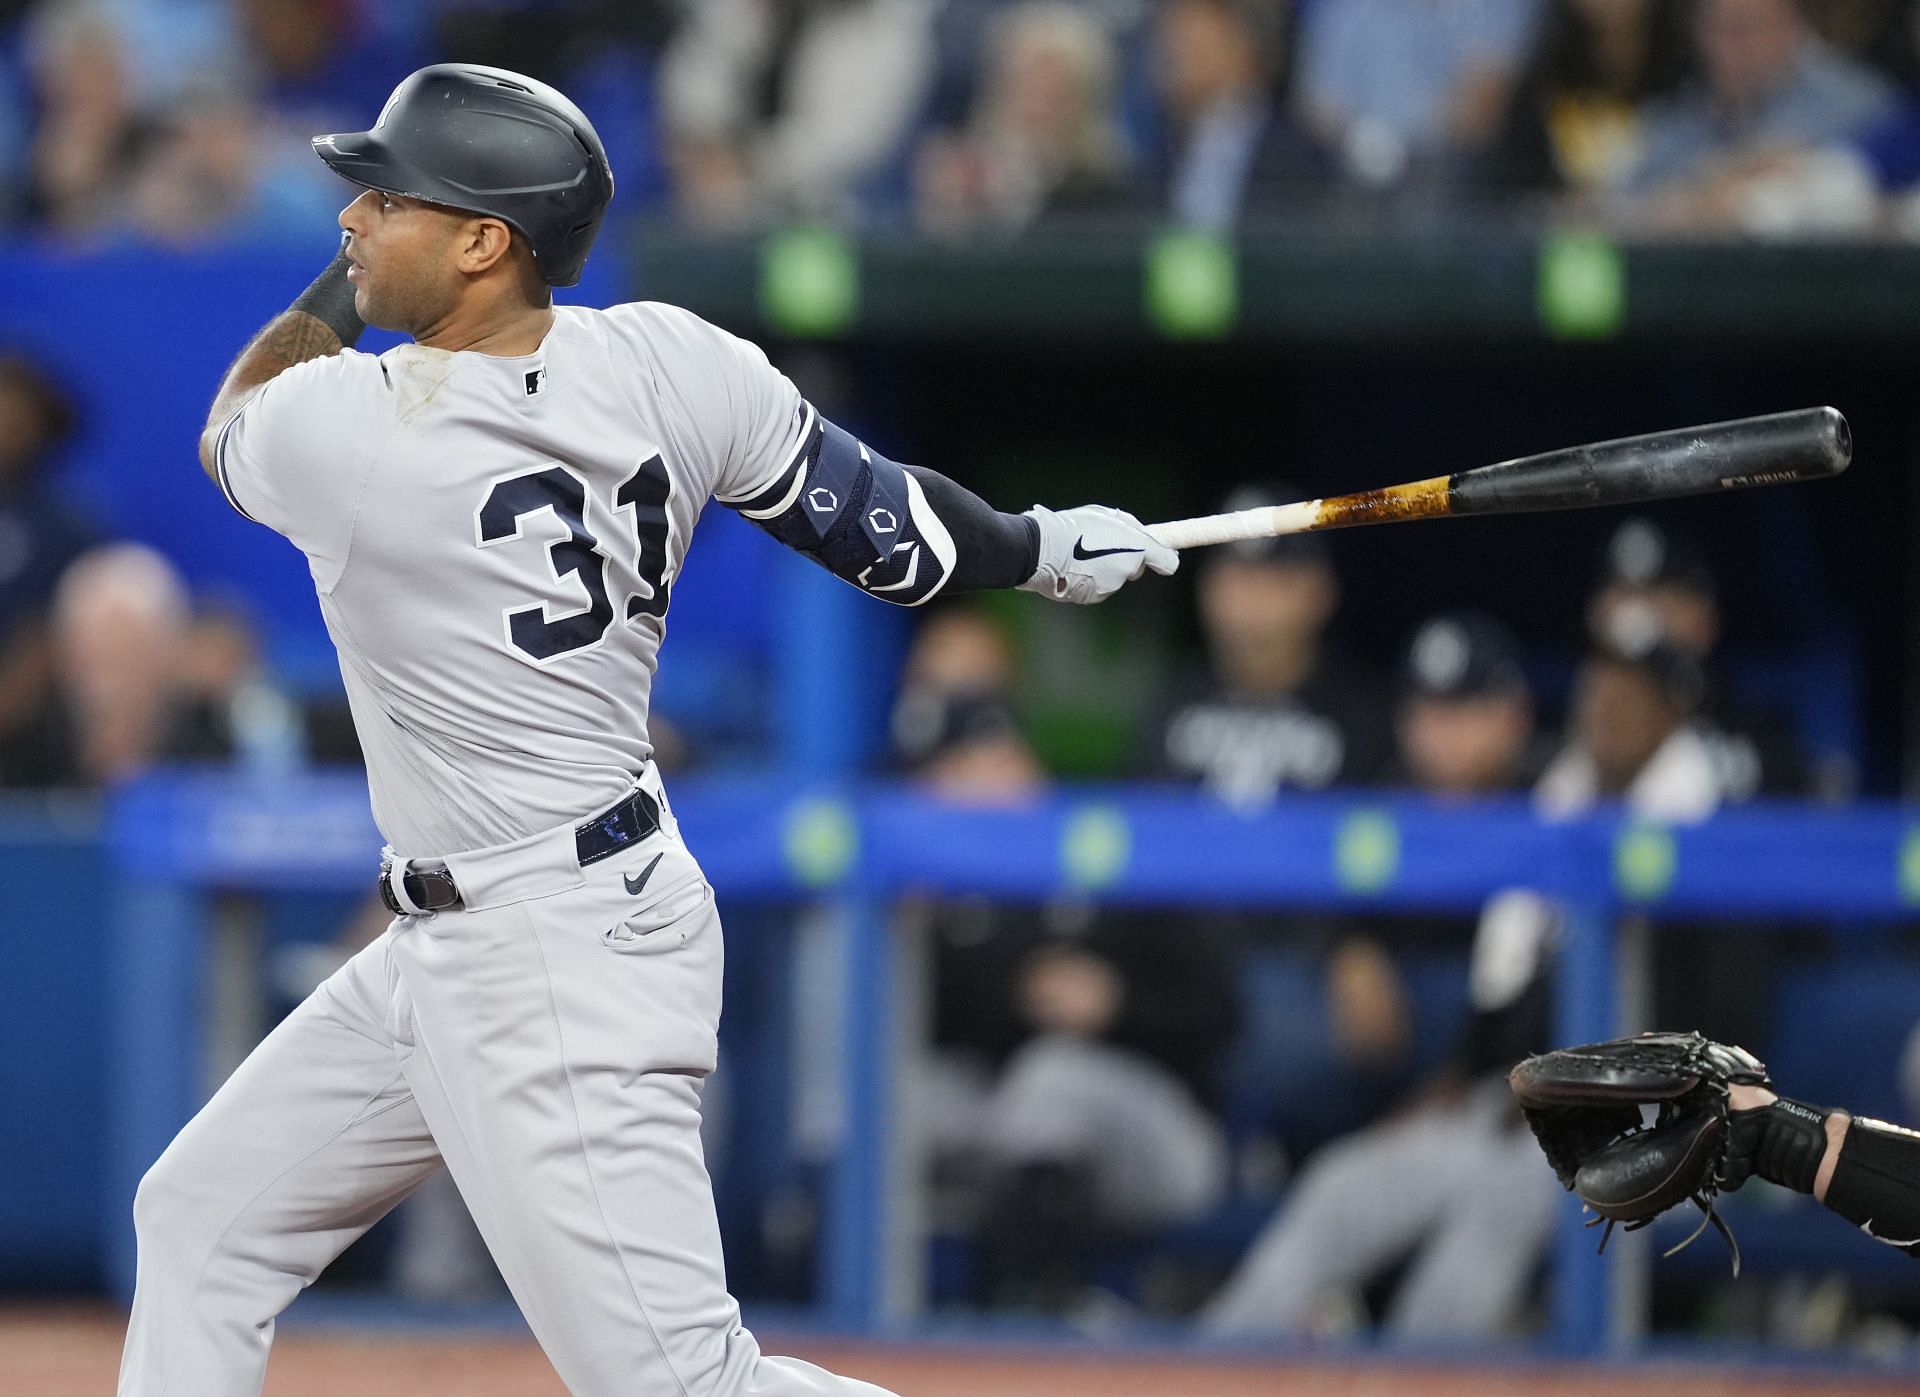 Yankees outfielder Aaron Hicks makes hole-in-one on par 4 – GolfWRX